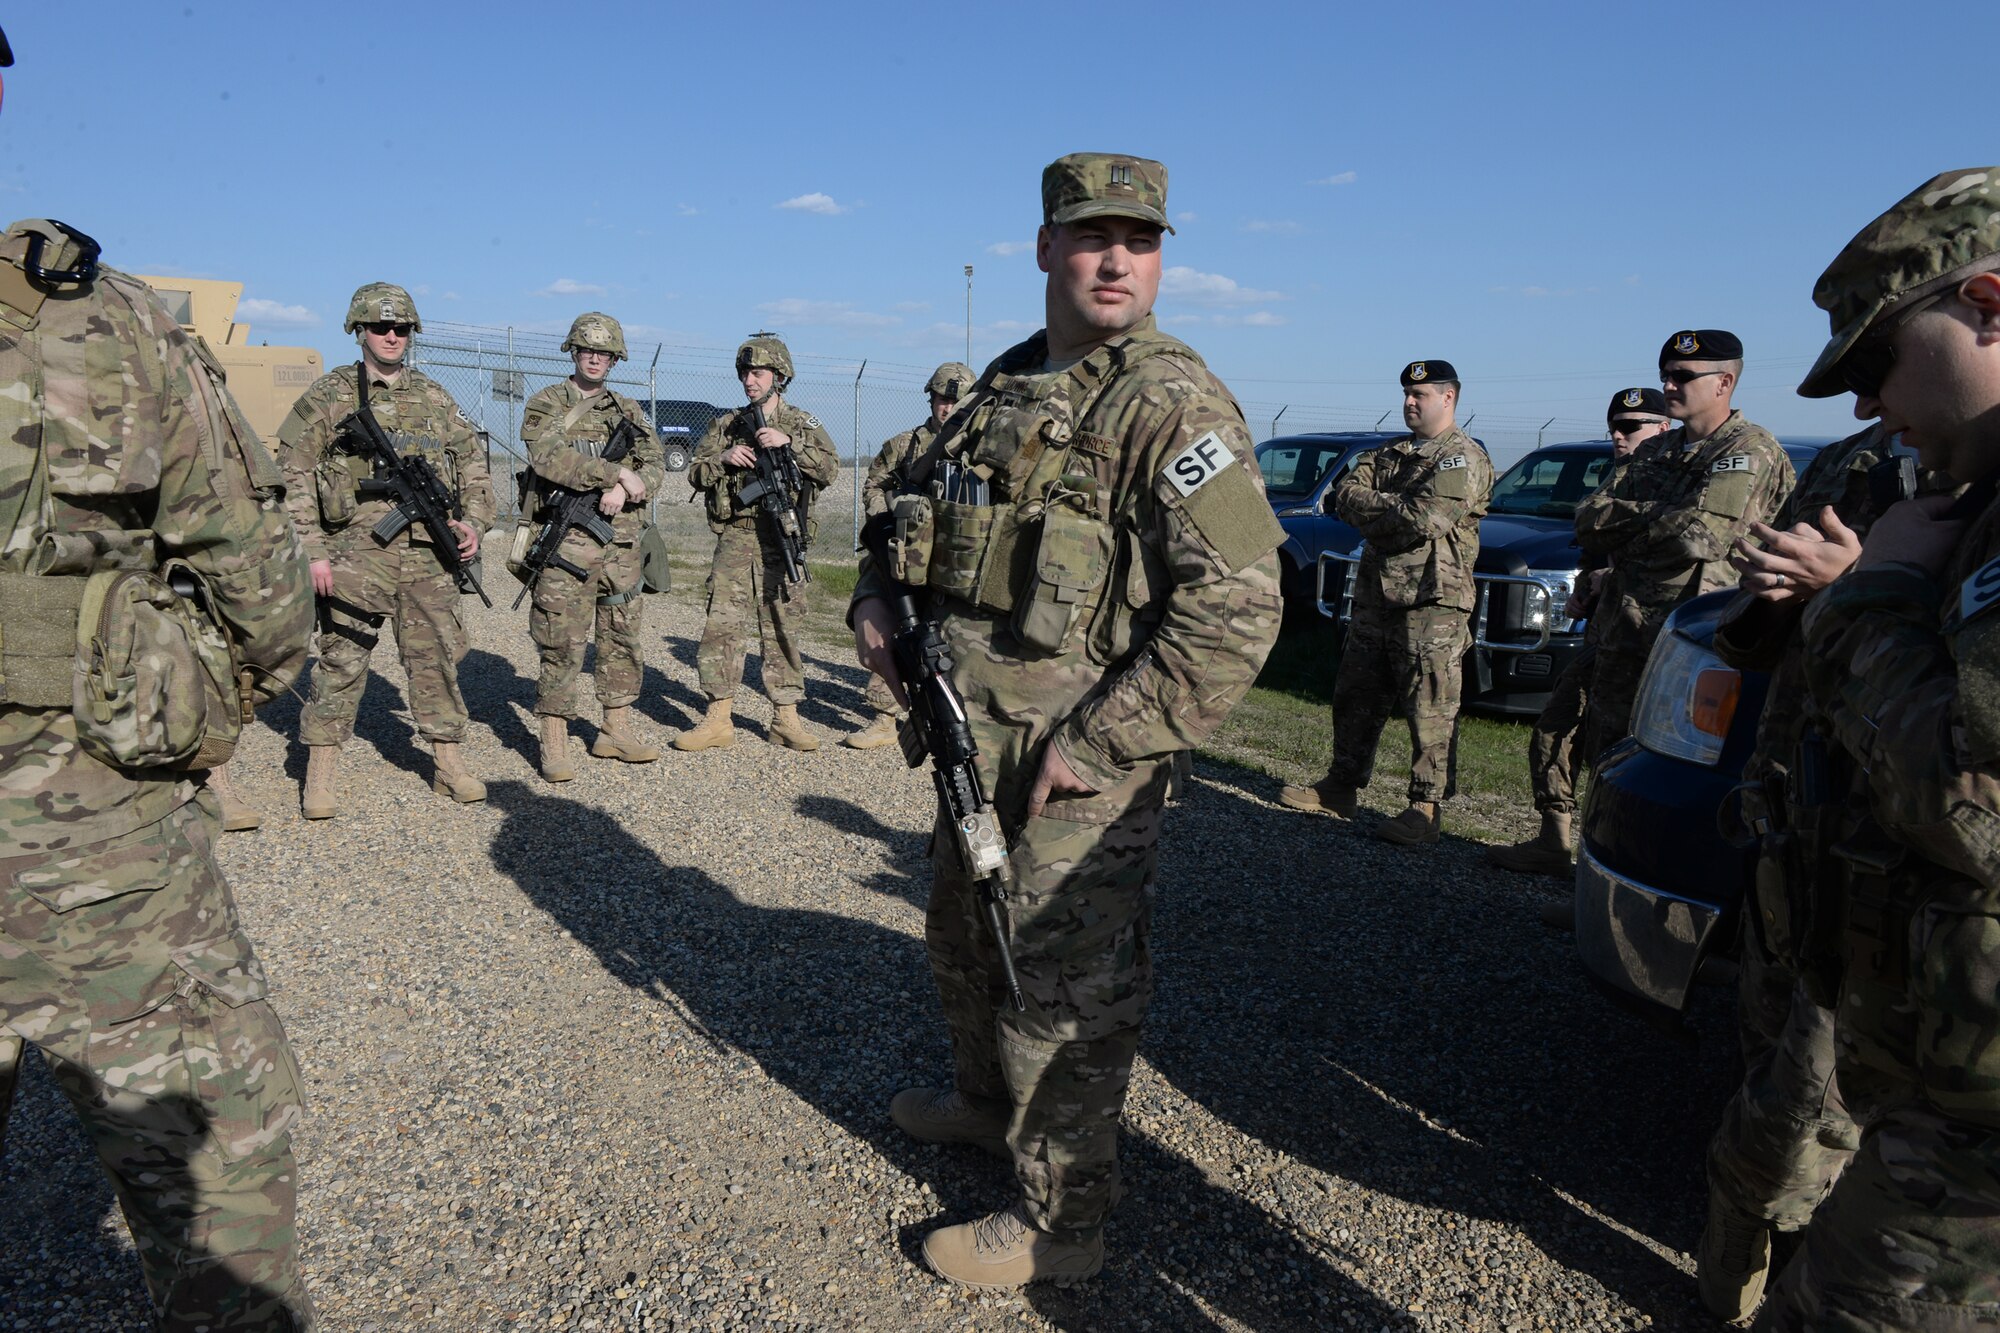 Capt. Brian Ludwig, of the 219th Security Forces Squadron, wearing the visible SF on his shoulder, conducts a briefing at the conclusion of a training exercise at a Minot Air Force Base, North Dakota, launch facility May 20, 2015. The exercise included an intermingled combination of North Dakota Air National Guard members doing their annual training and 91st Missile Security Forces Squadron members performing their day-to-day duties. The Air National Guard members are routinely integrated among the U.S. Air Force active duty personnel as they perform the real-World mission of missile field security in a seamless and indistinguishable manner. (U.S. Air National Guard photo by Senior Master Sgt. David H. Lipp/Released)